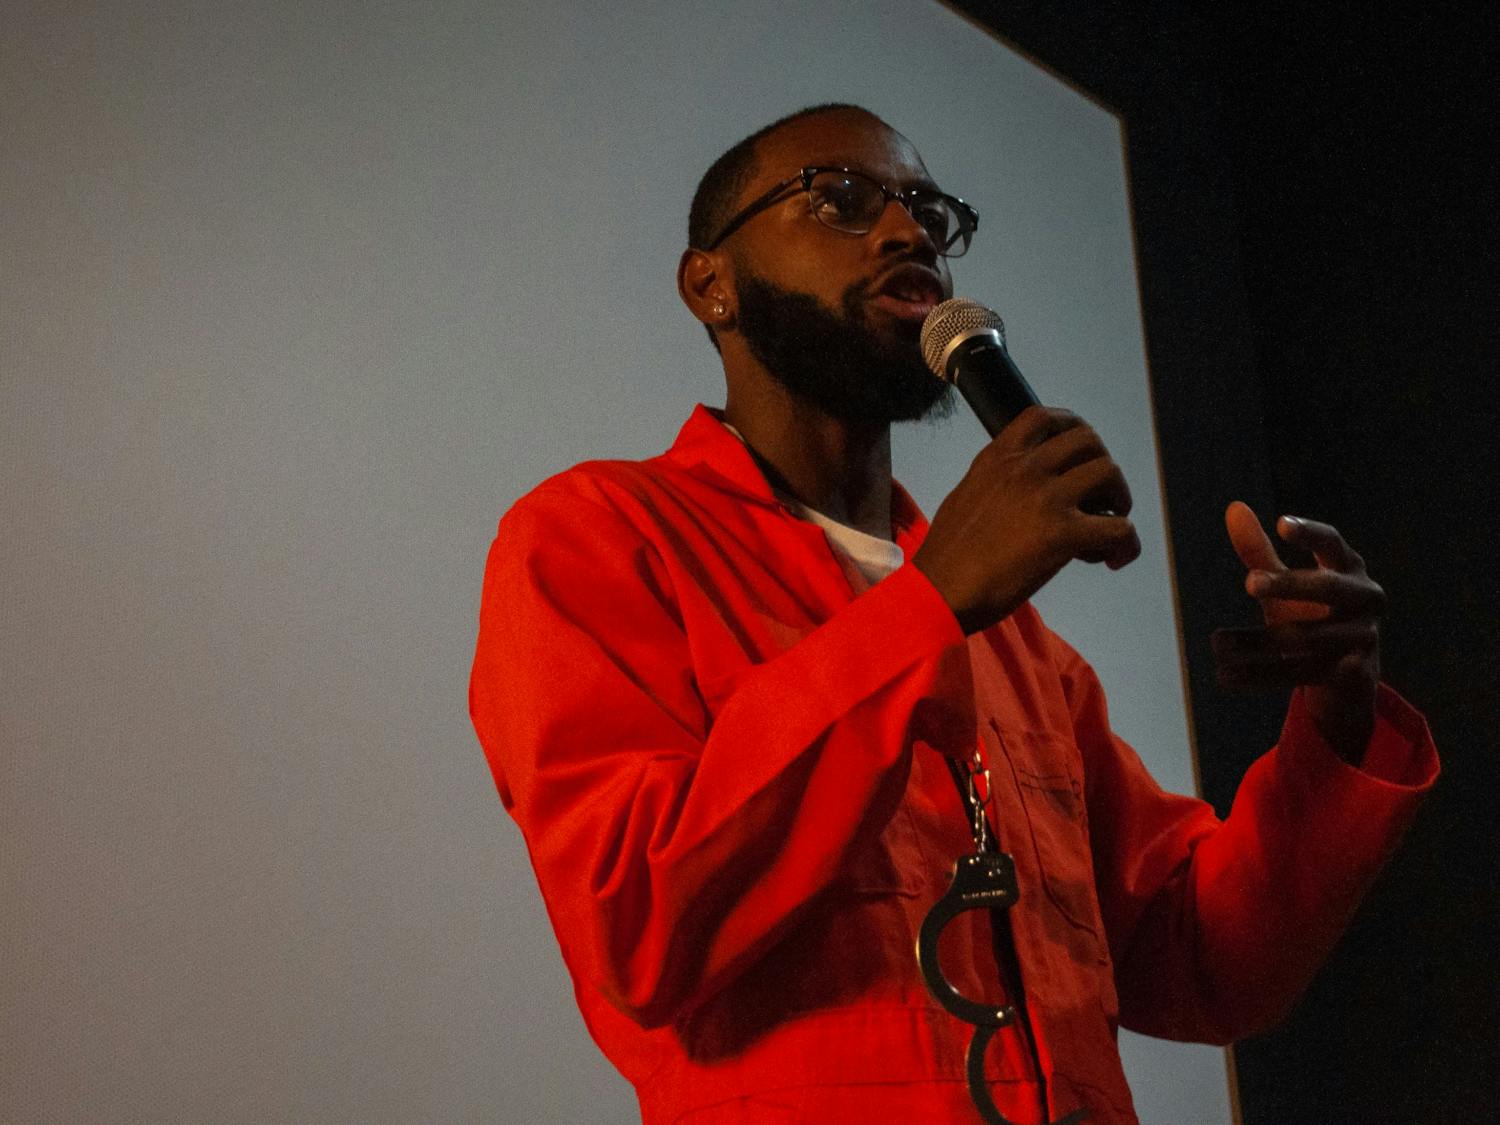 Nick Courmon, the community engagement coordinator for Racist Roots, addresses the crowd after the film's screening at Chelsea Theater in Chapel Hill on Thursday, Aug. 18, 2022.